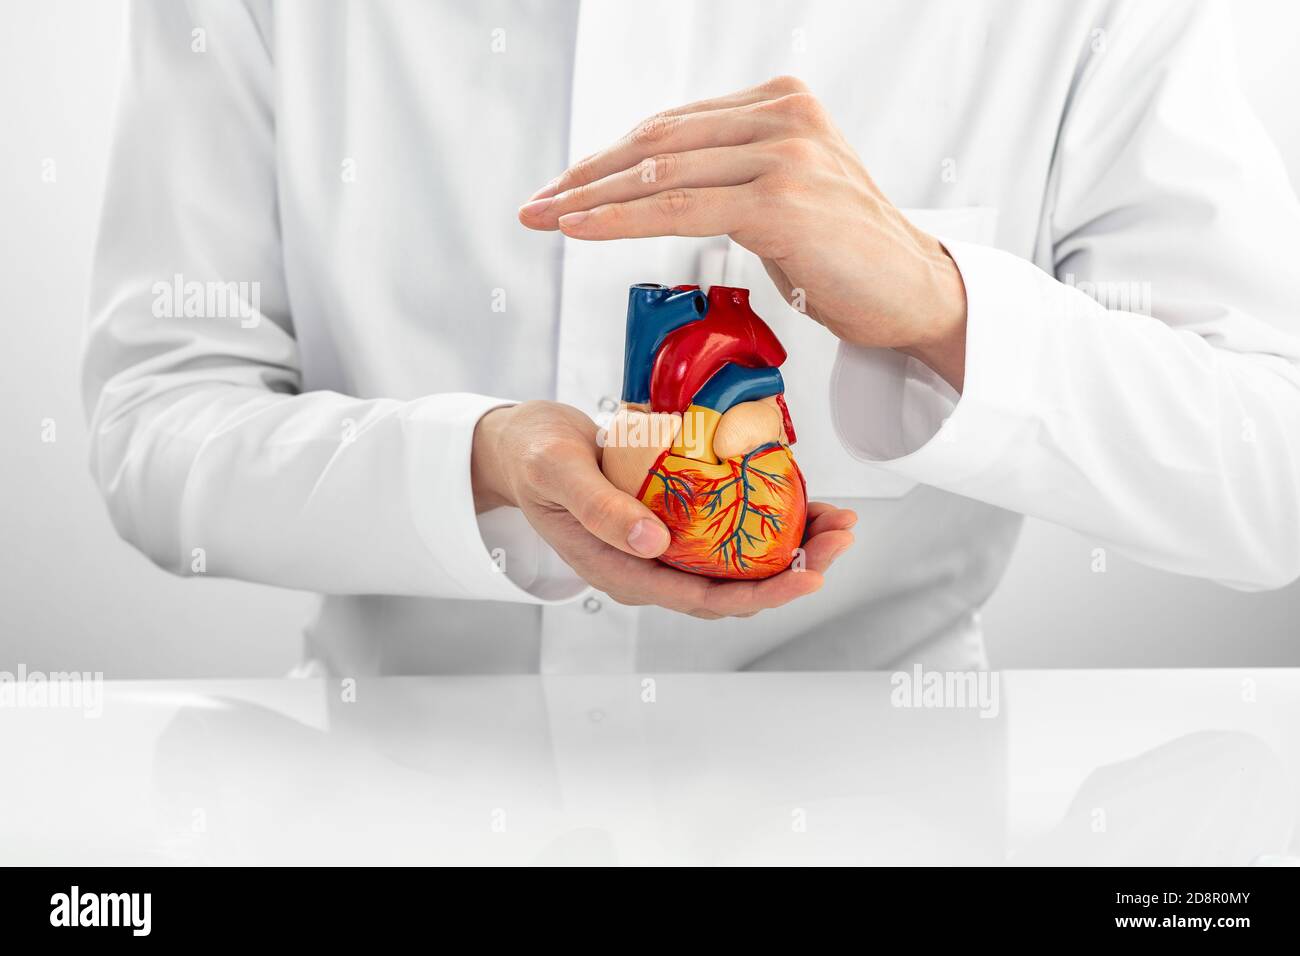 medical support for human cardiac health. Cardiologist wearing medical coat holding a model heart in his hands Stock Photo